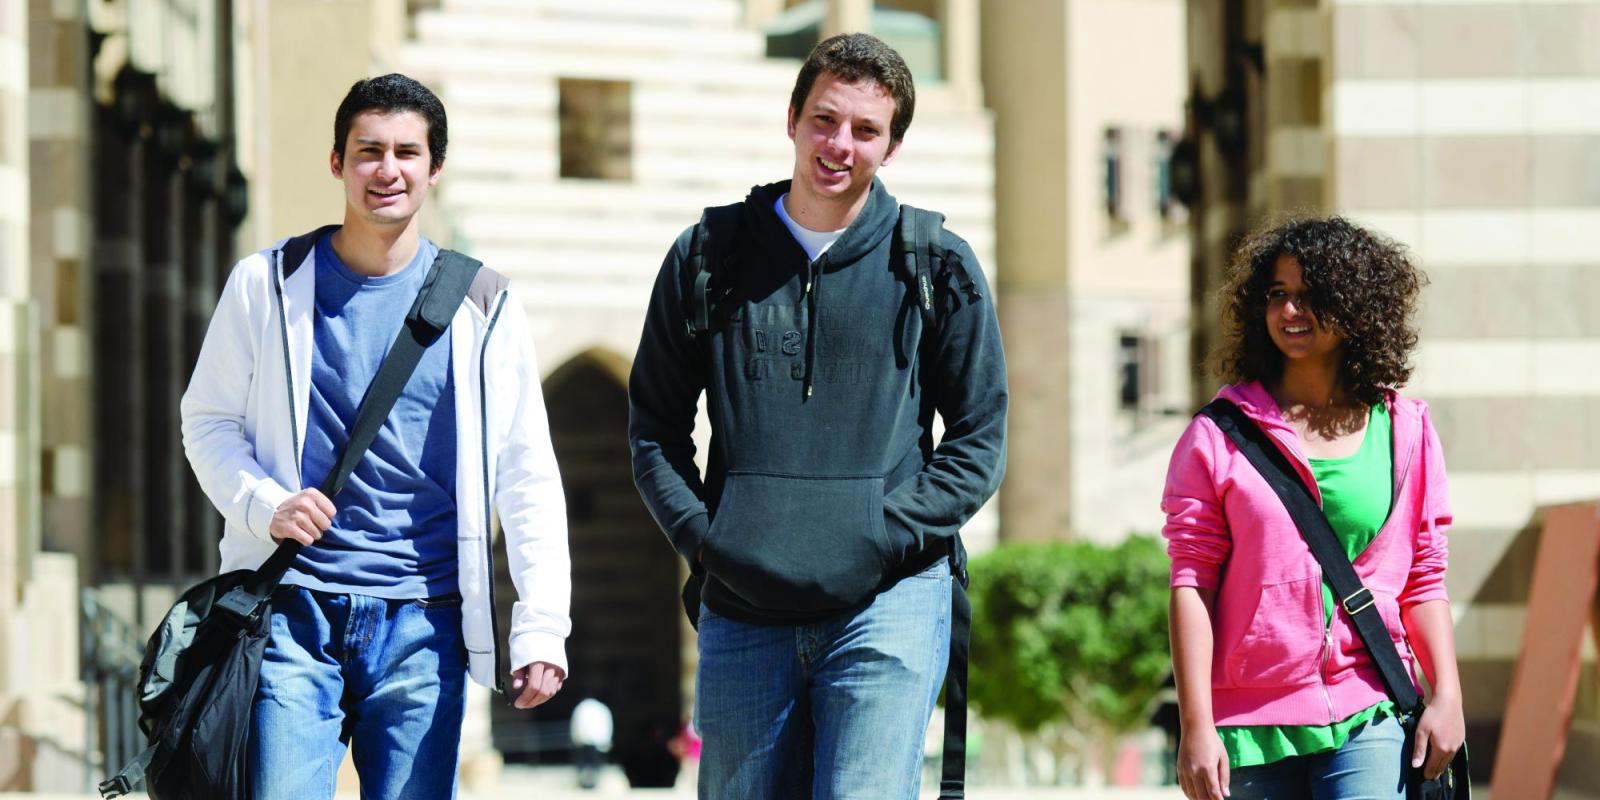 Trends for AUC's class of 2019 include a rise in applications and more selective admissions. 